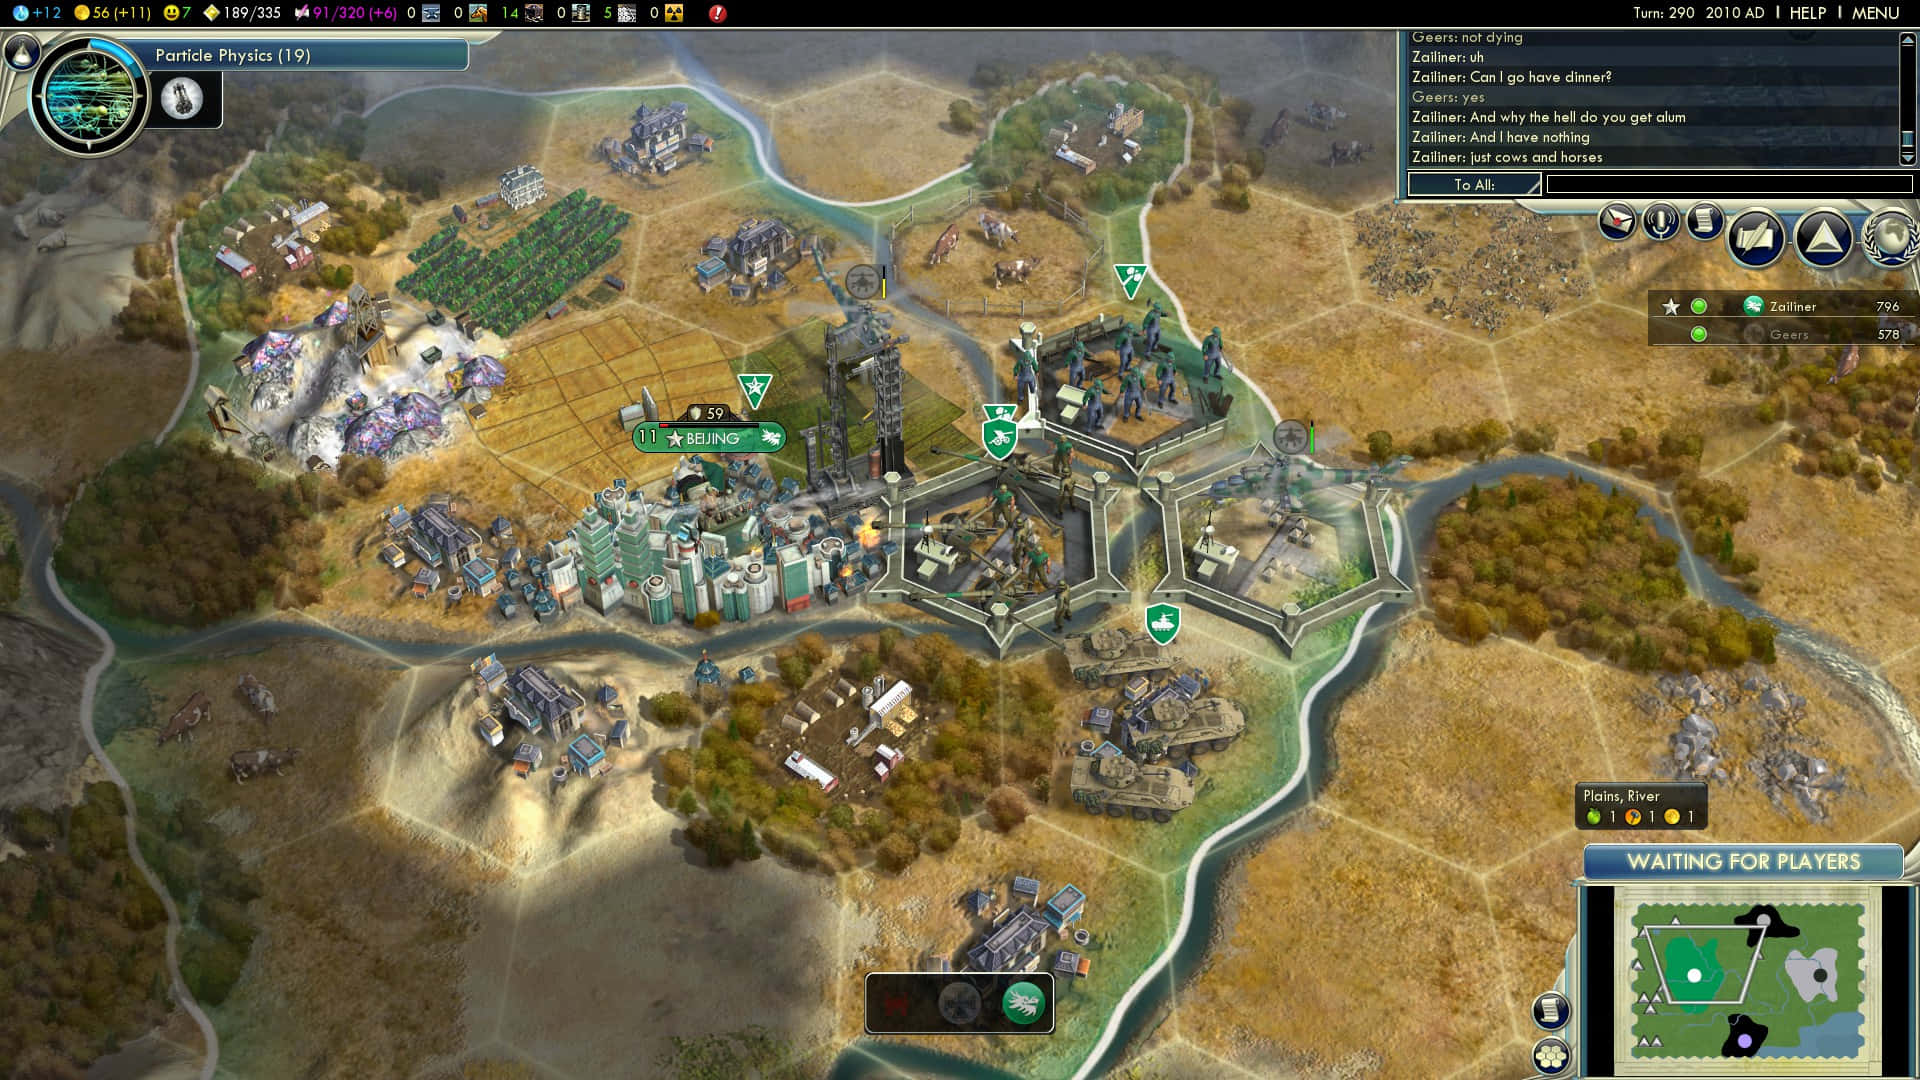 Dive into a City of the Future in Civilization Beyond Earth